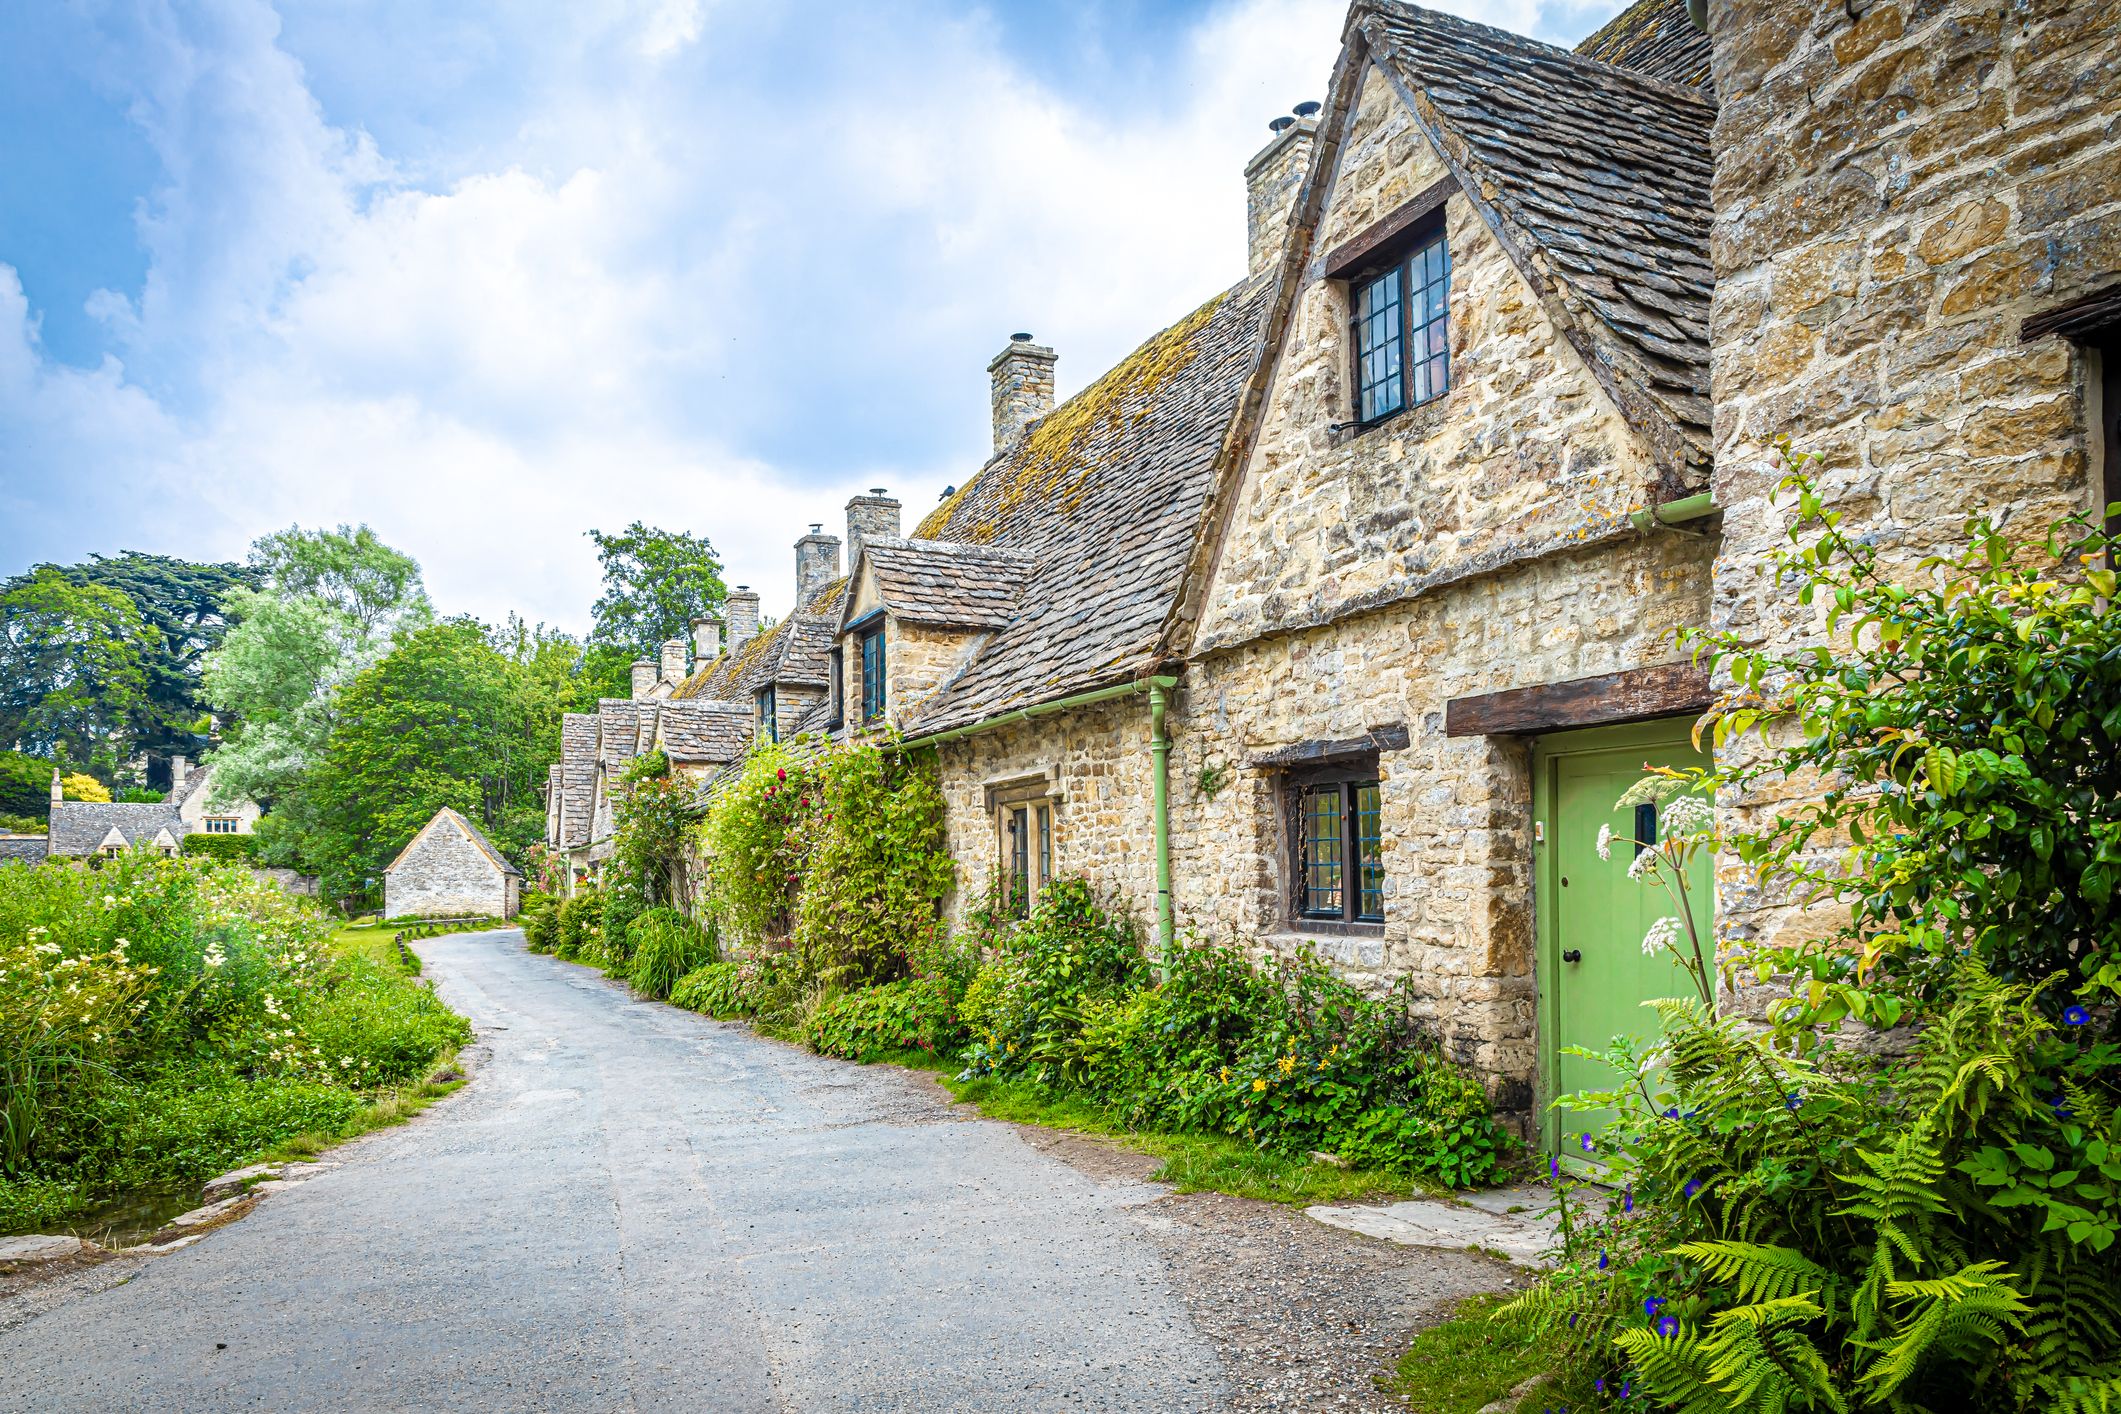 Cotswolds: Photos proving it's the prettiest place in the world